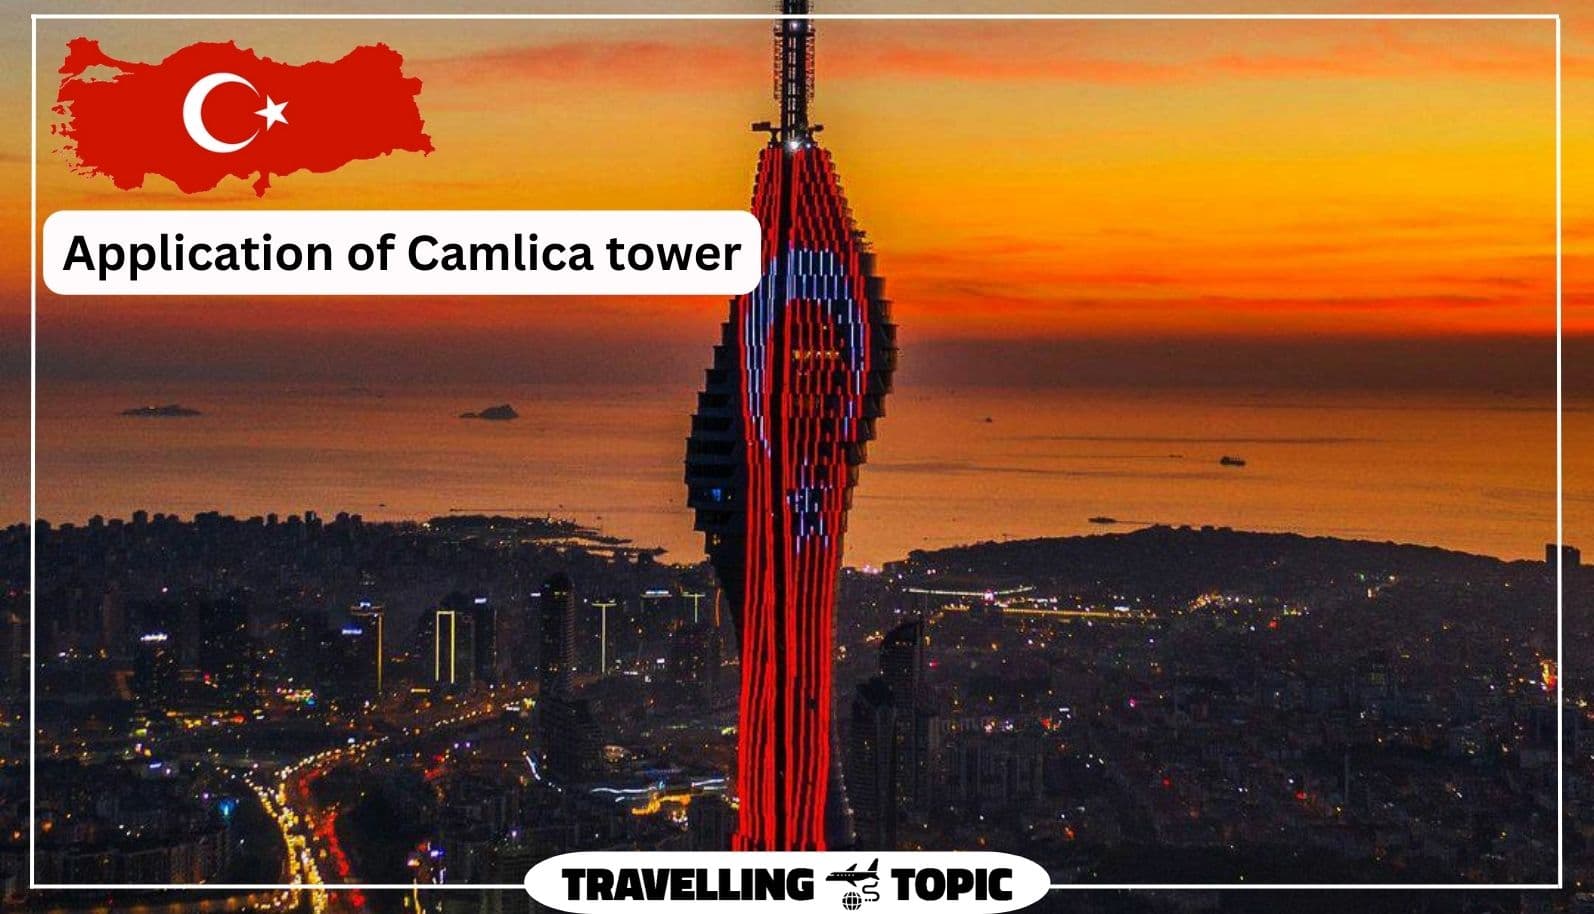 Application of Camlica tower